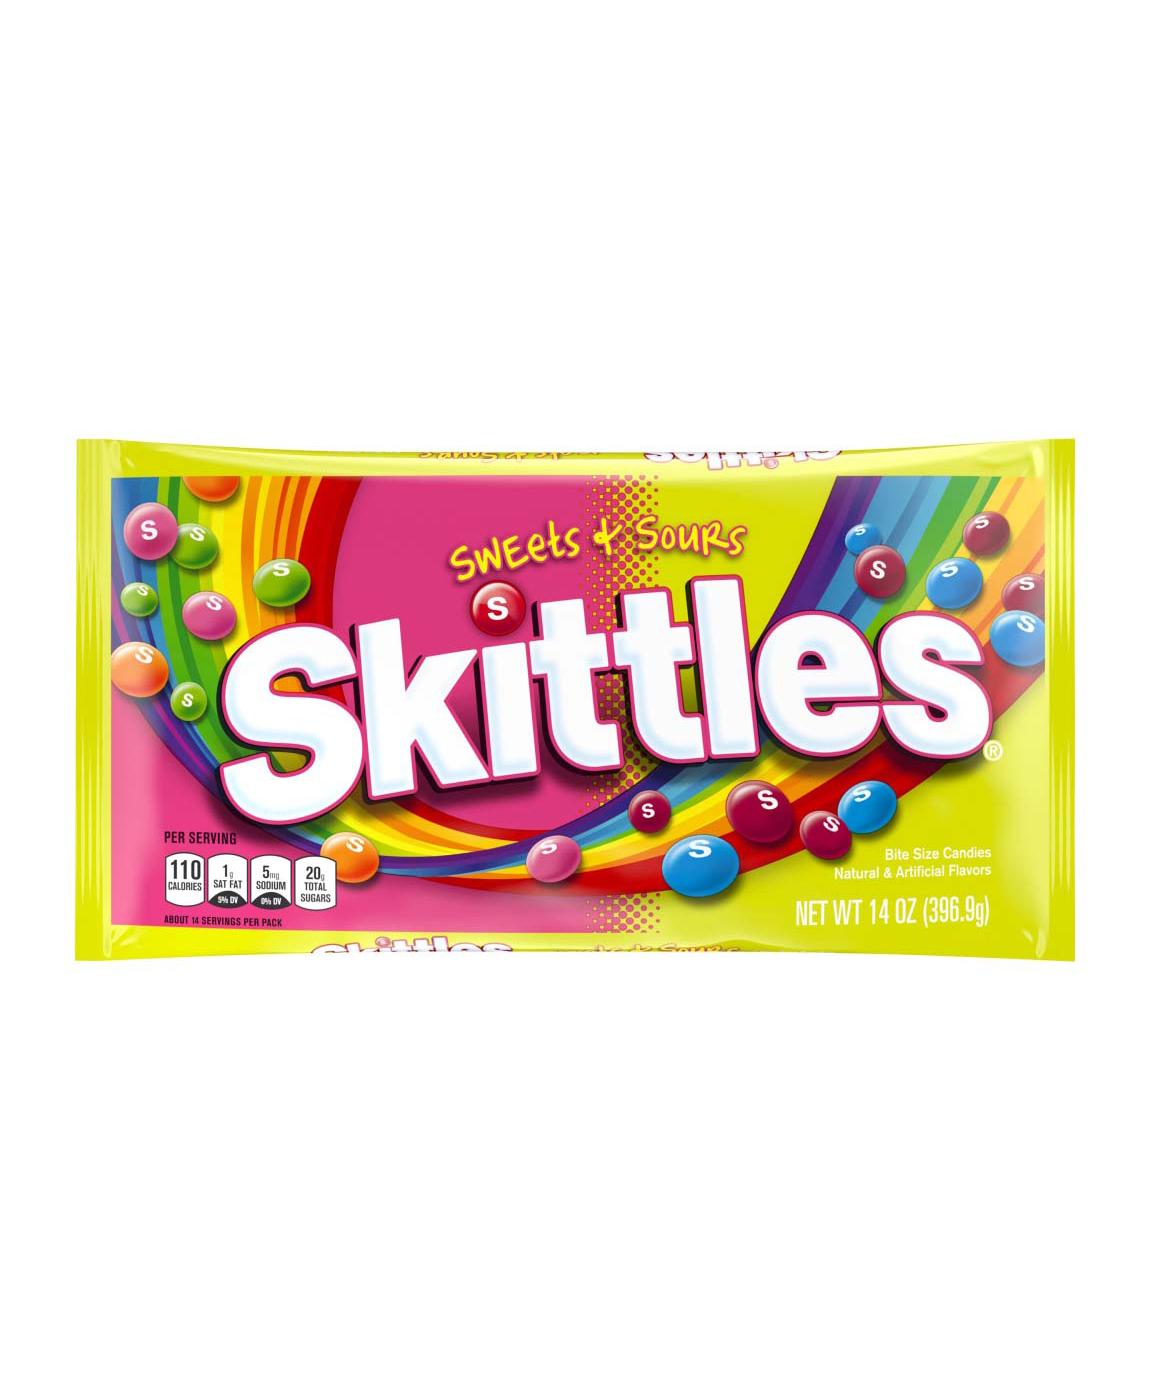 Skittles Sweets and Sours Candy Bag; image 1 of 7